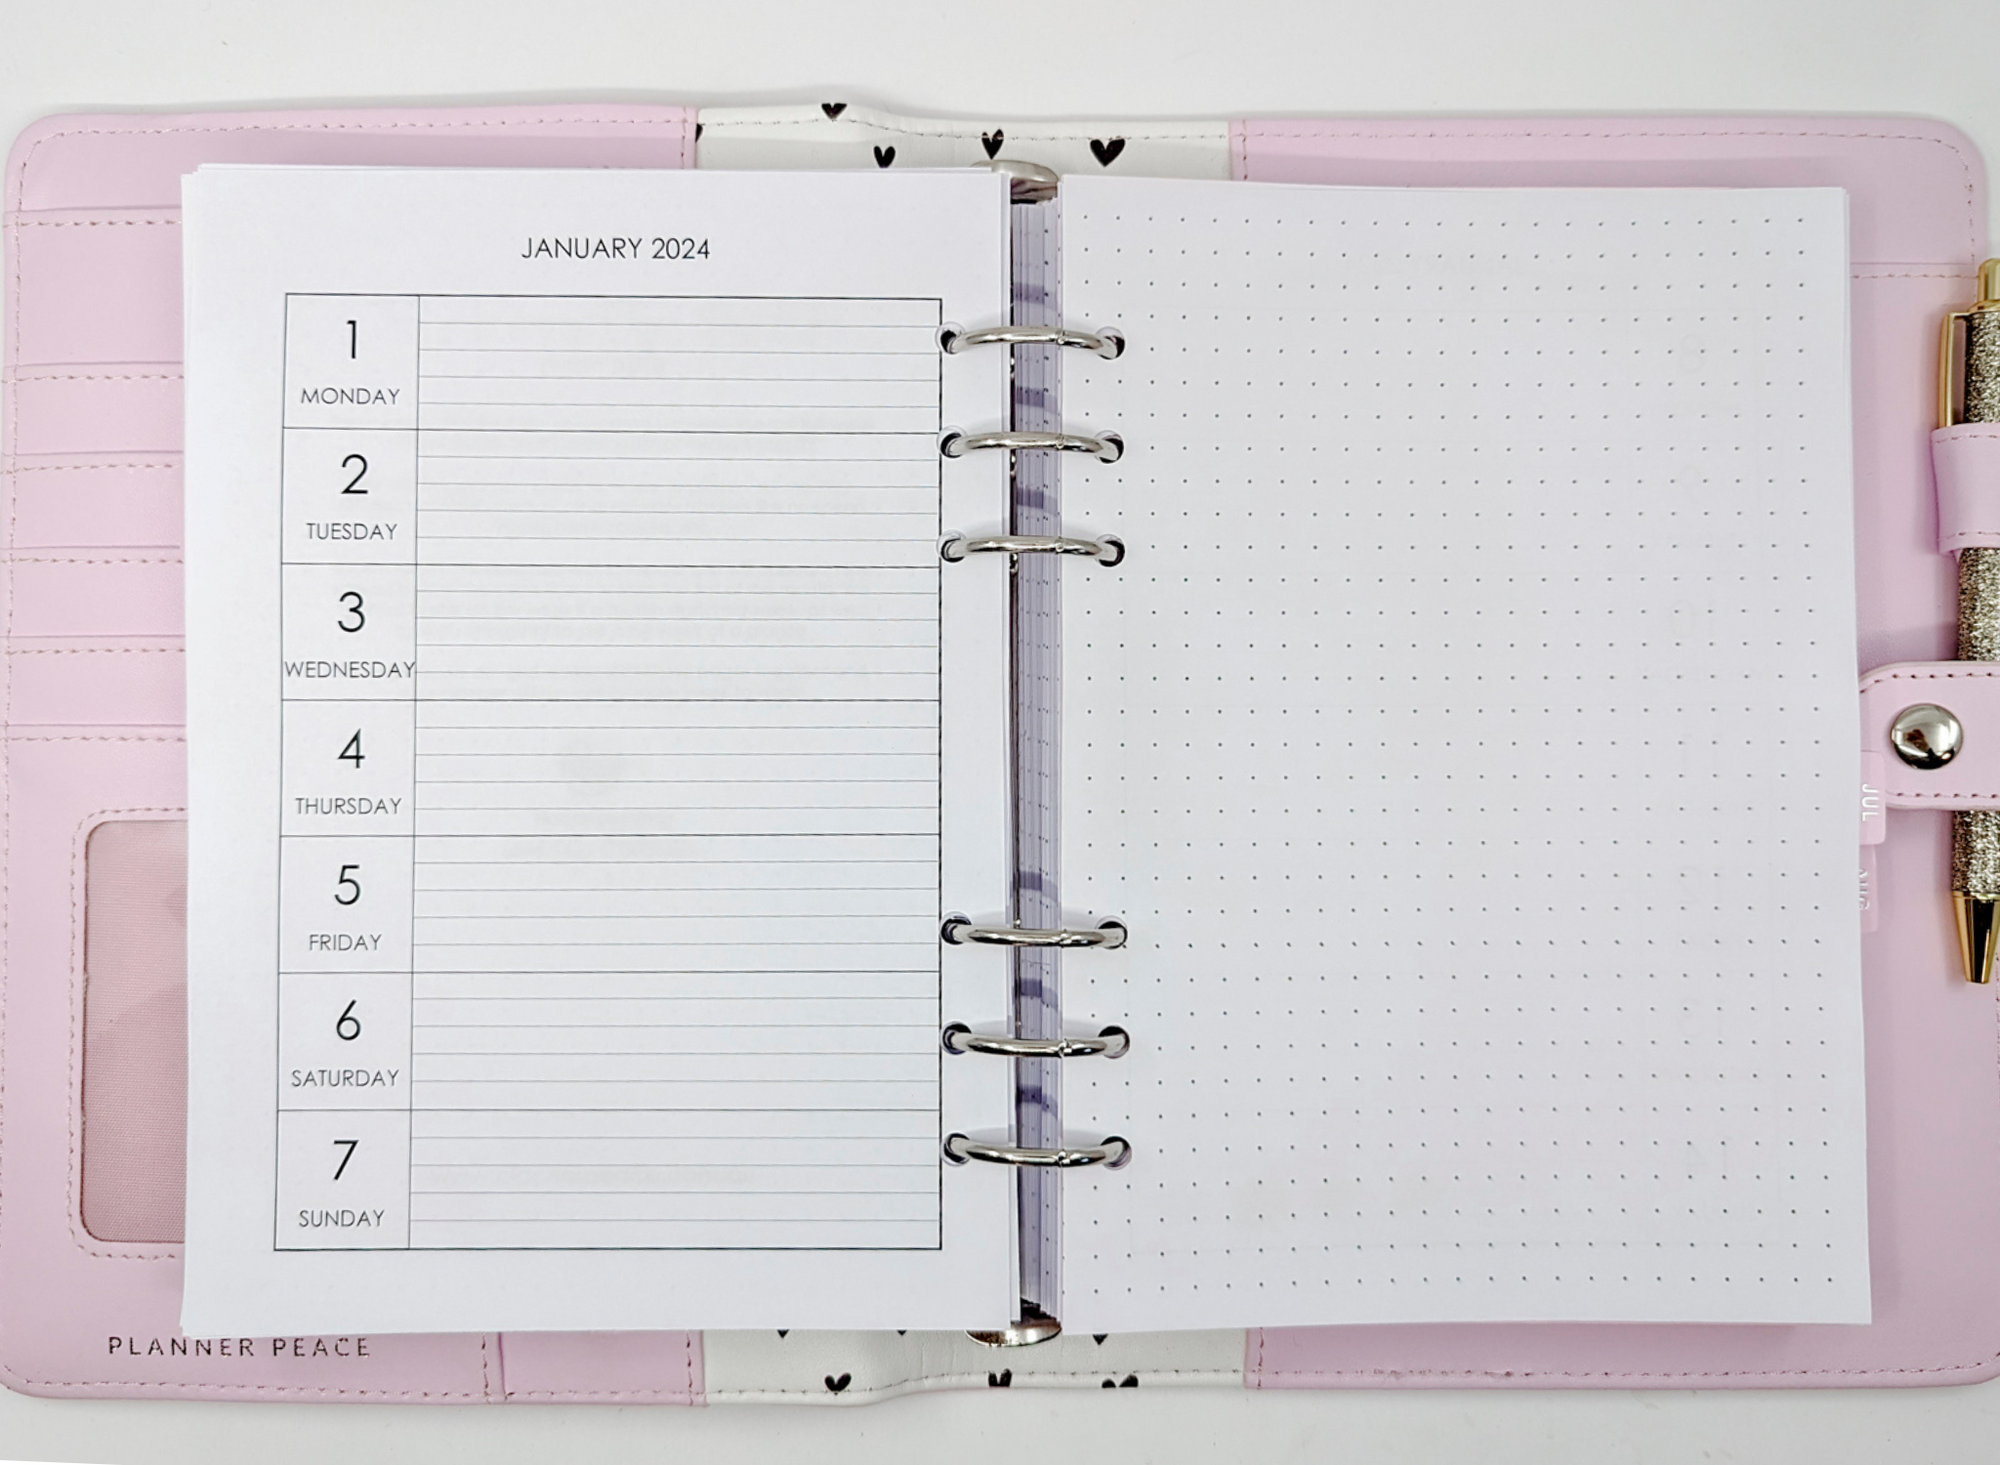 Planner Peace A5 planner refill weekly planner inserts for A5 planners